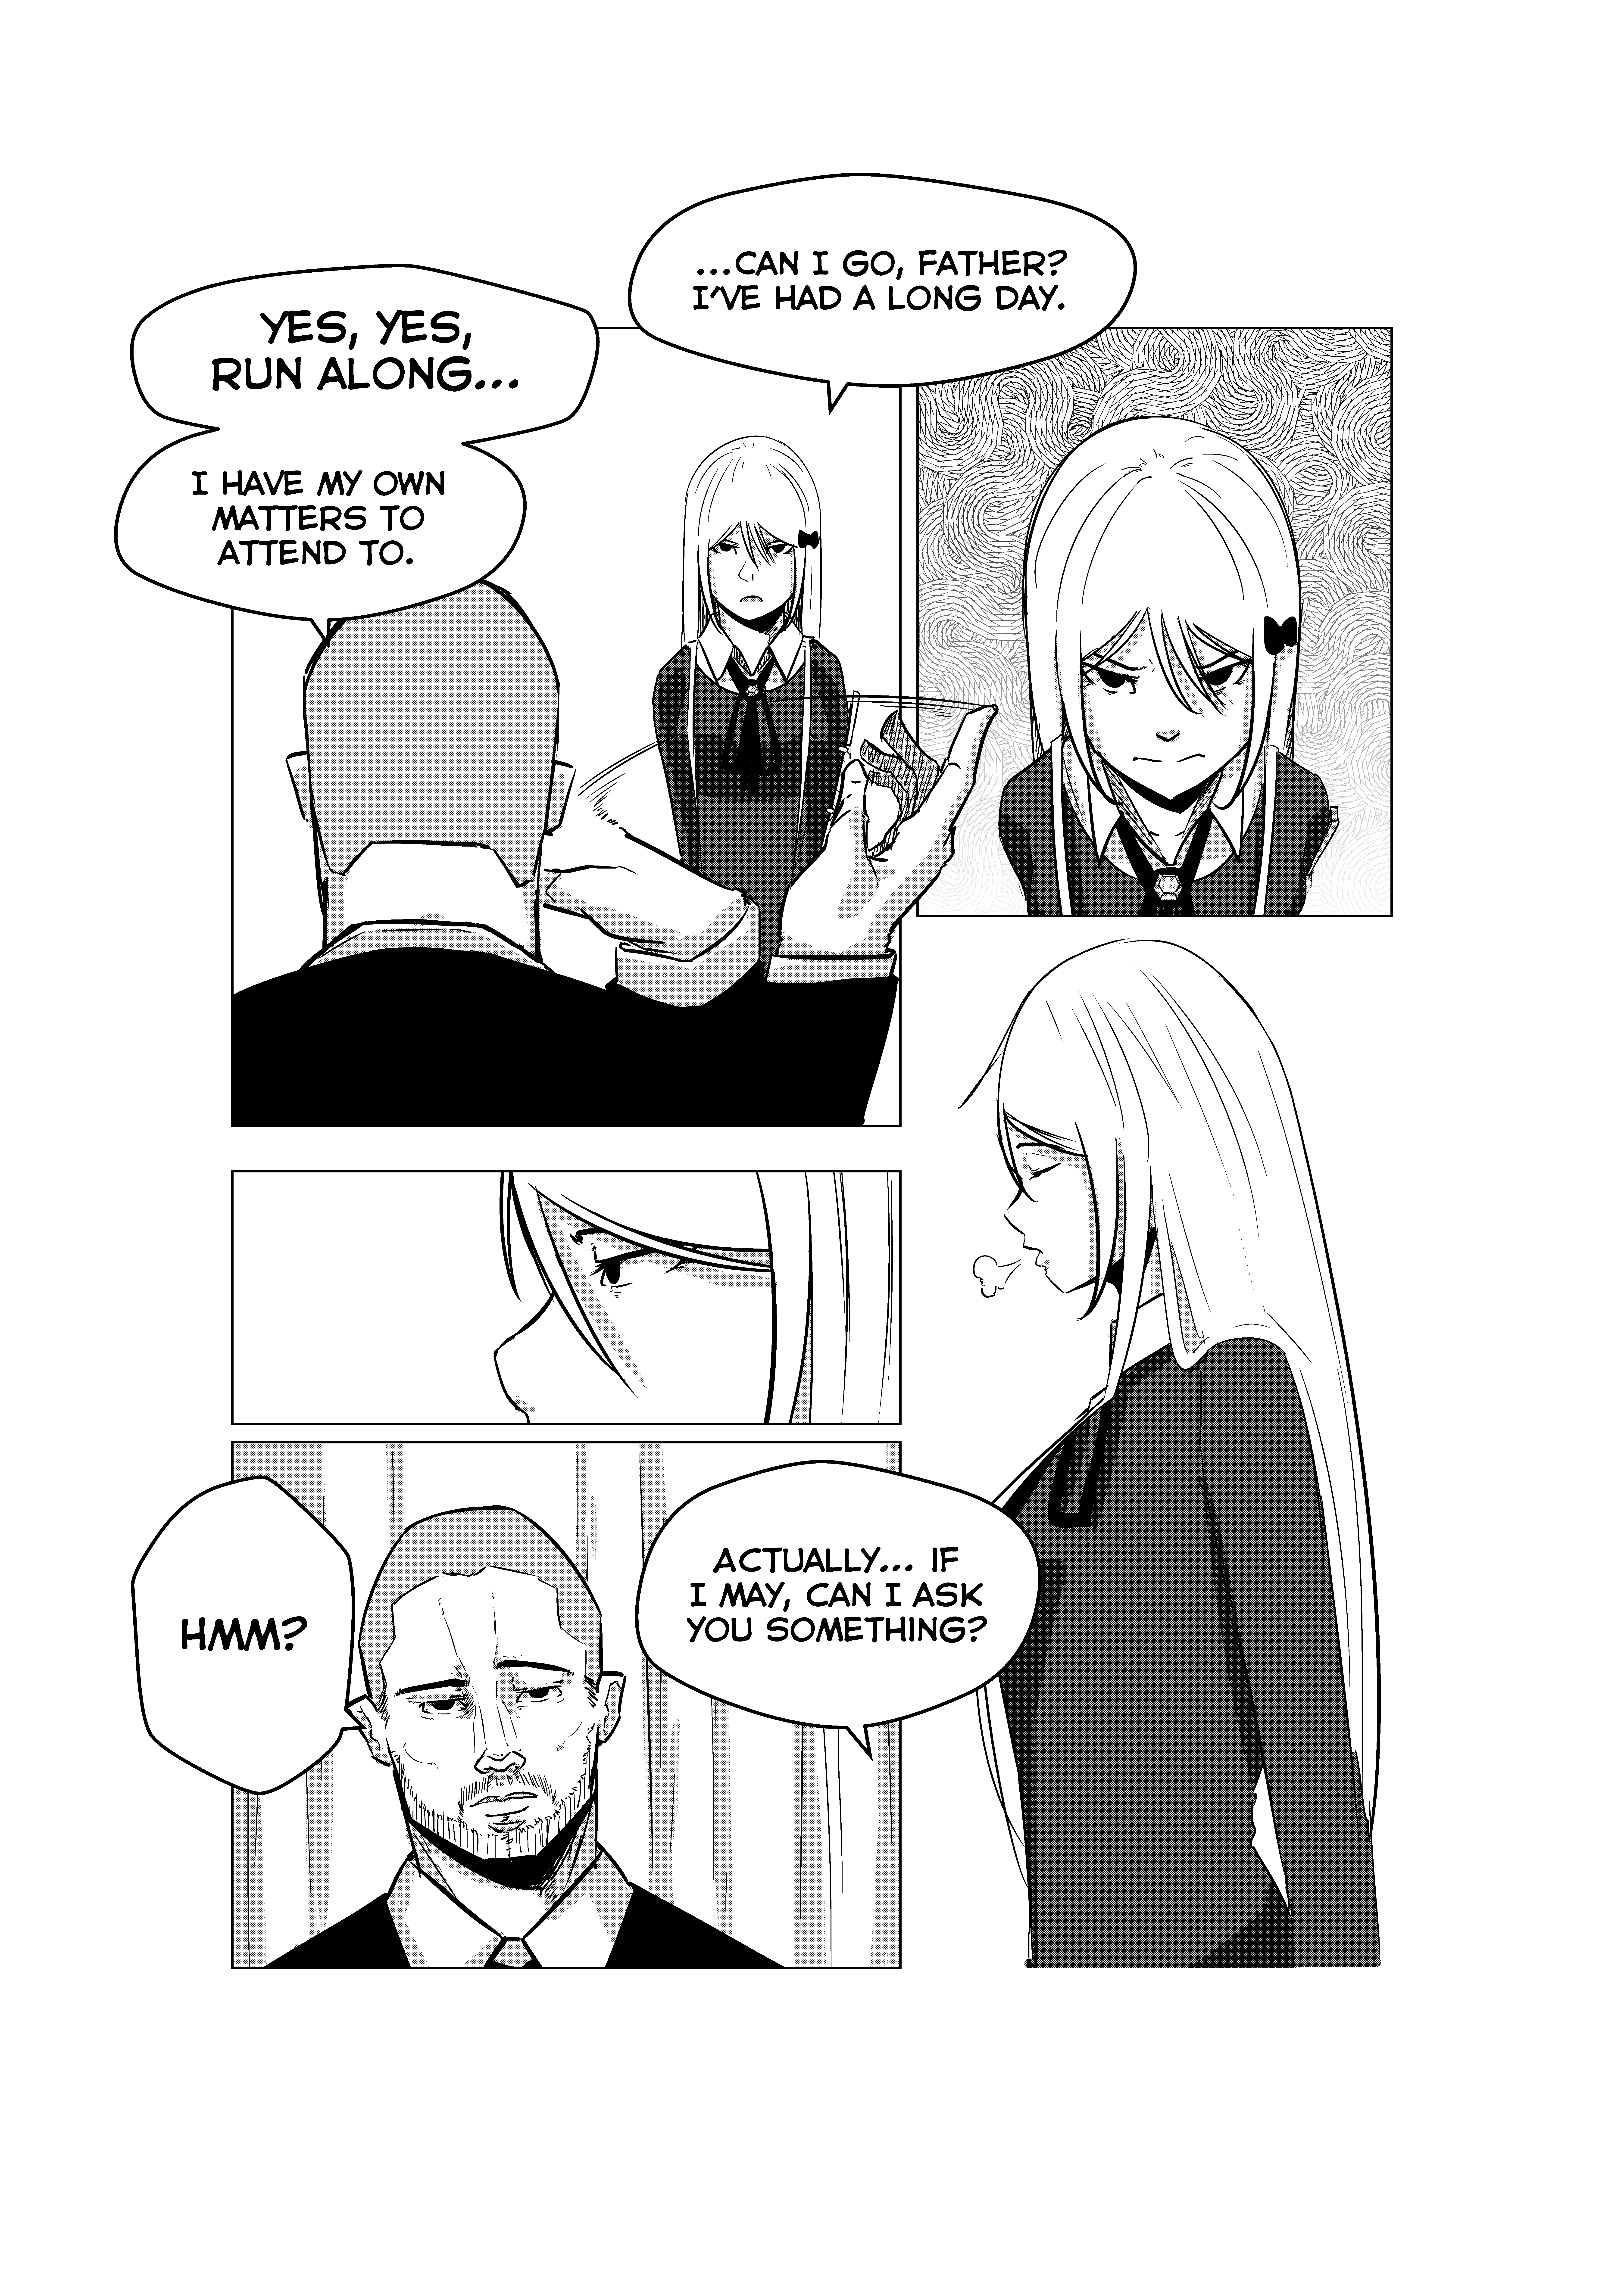 Opposites In Disguise - 7 page 8